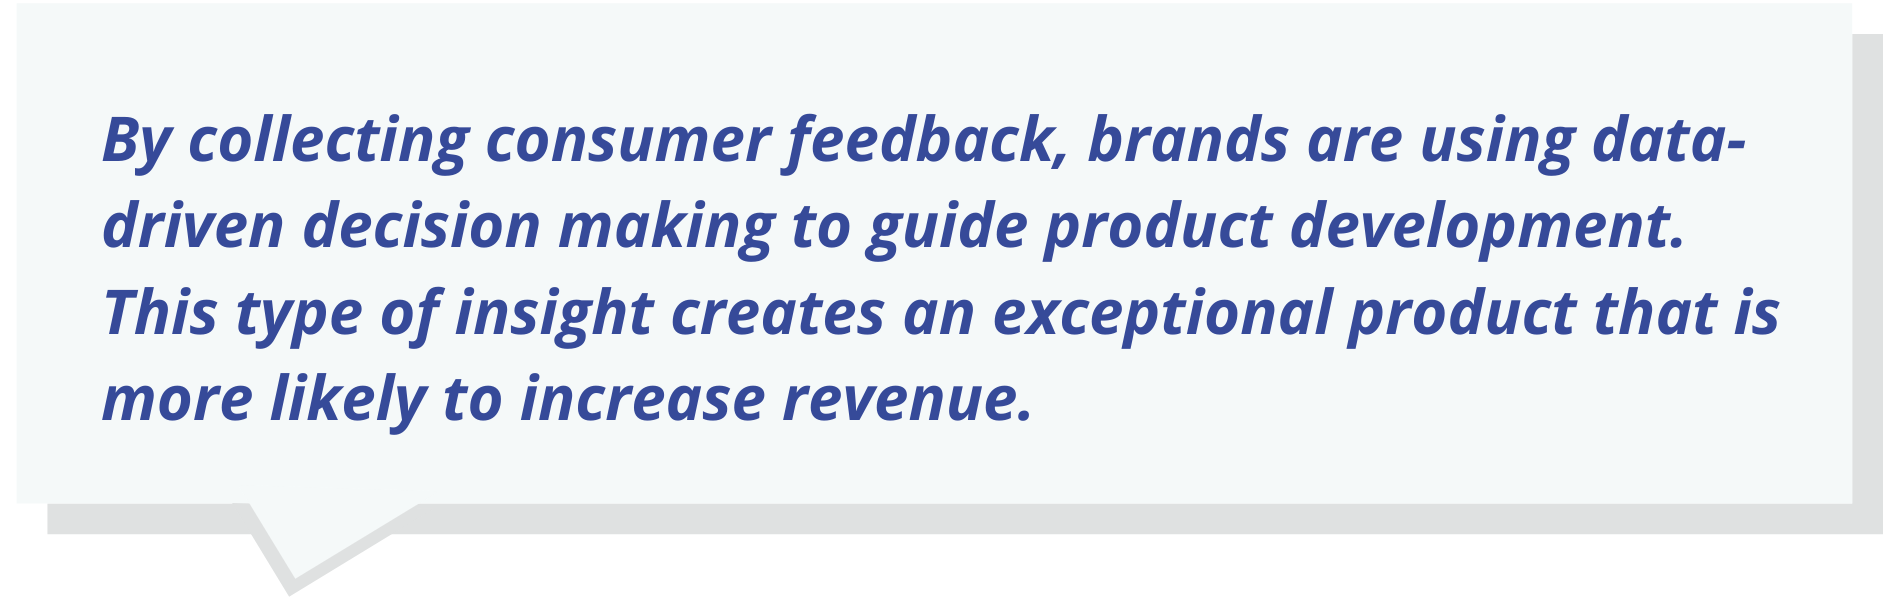 By collecting consumer feedback, brands are using data-driven decision making to guide product development.  This type of insight creates an exceptional product that is more likely to increase revenue.